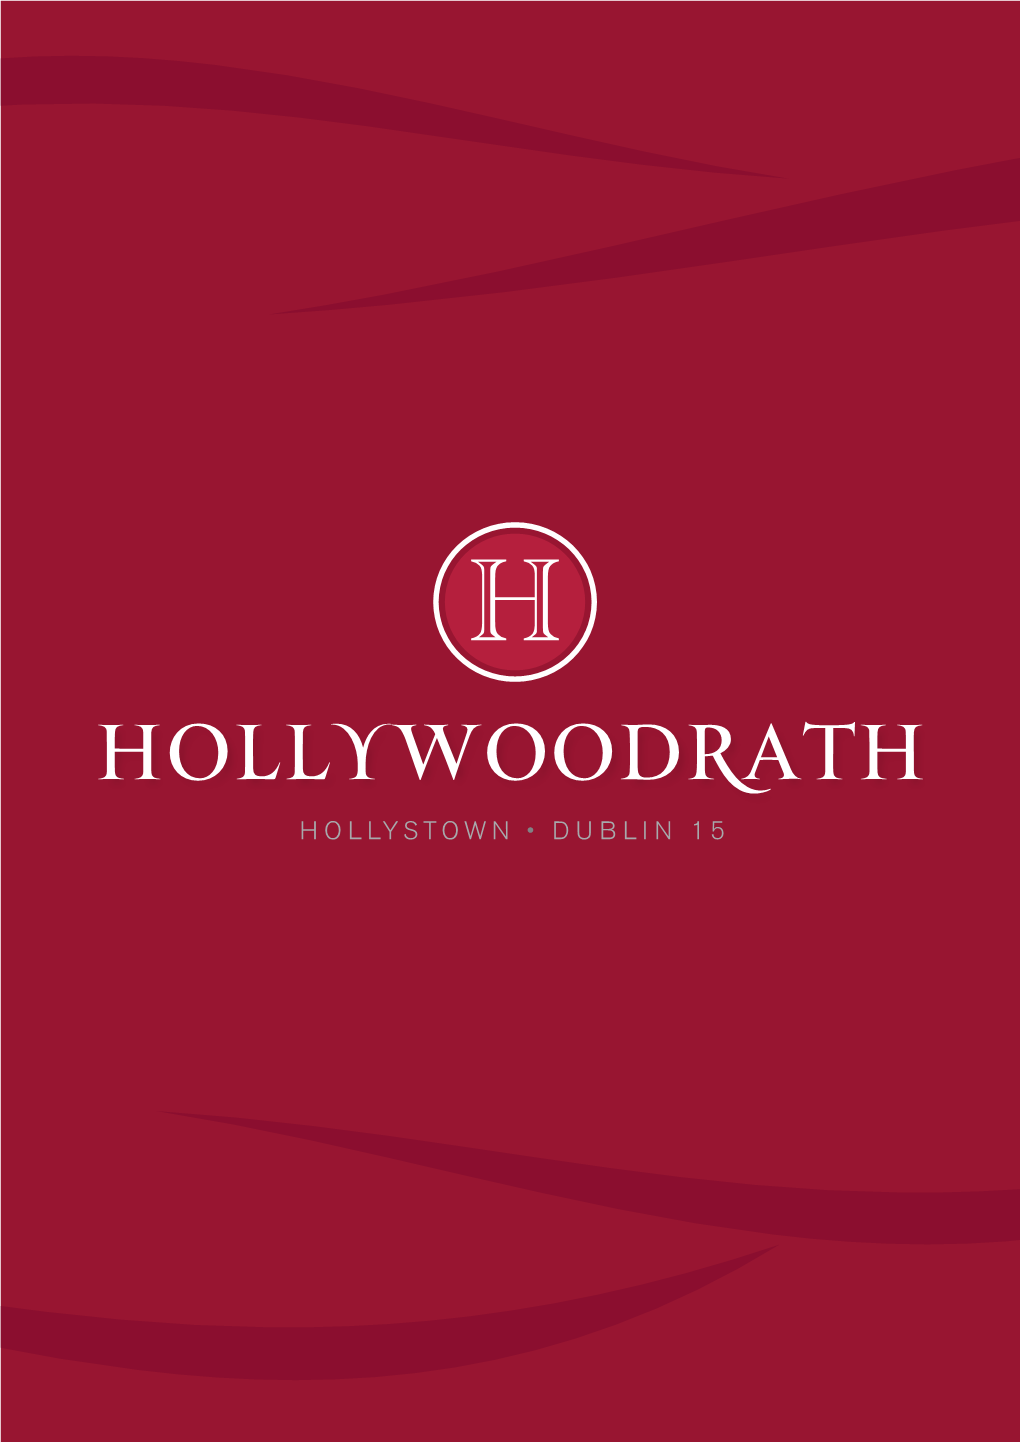 Hollystown Dublin 15 Welcome to Hollywoodrath